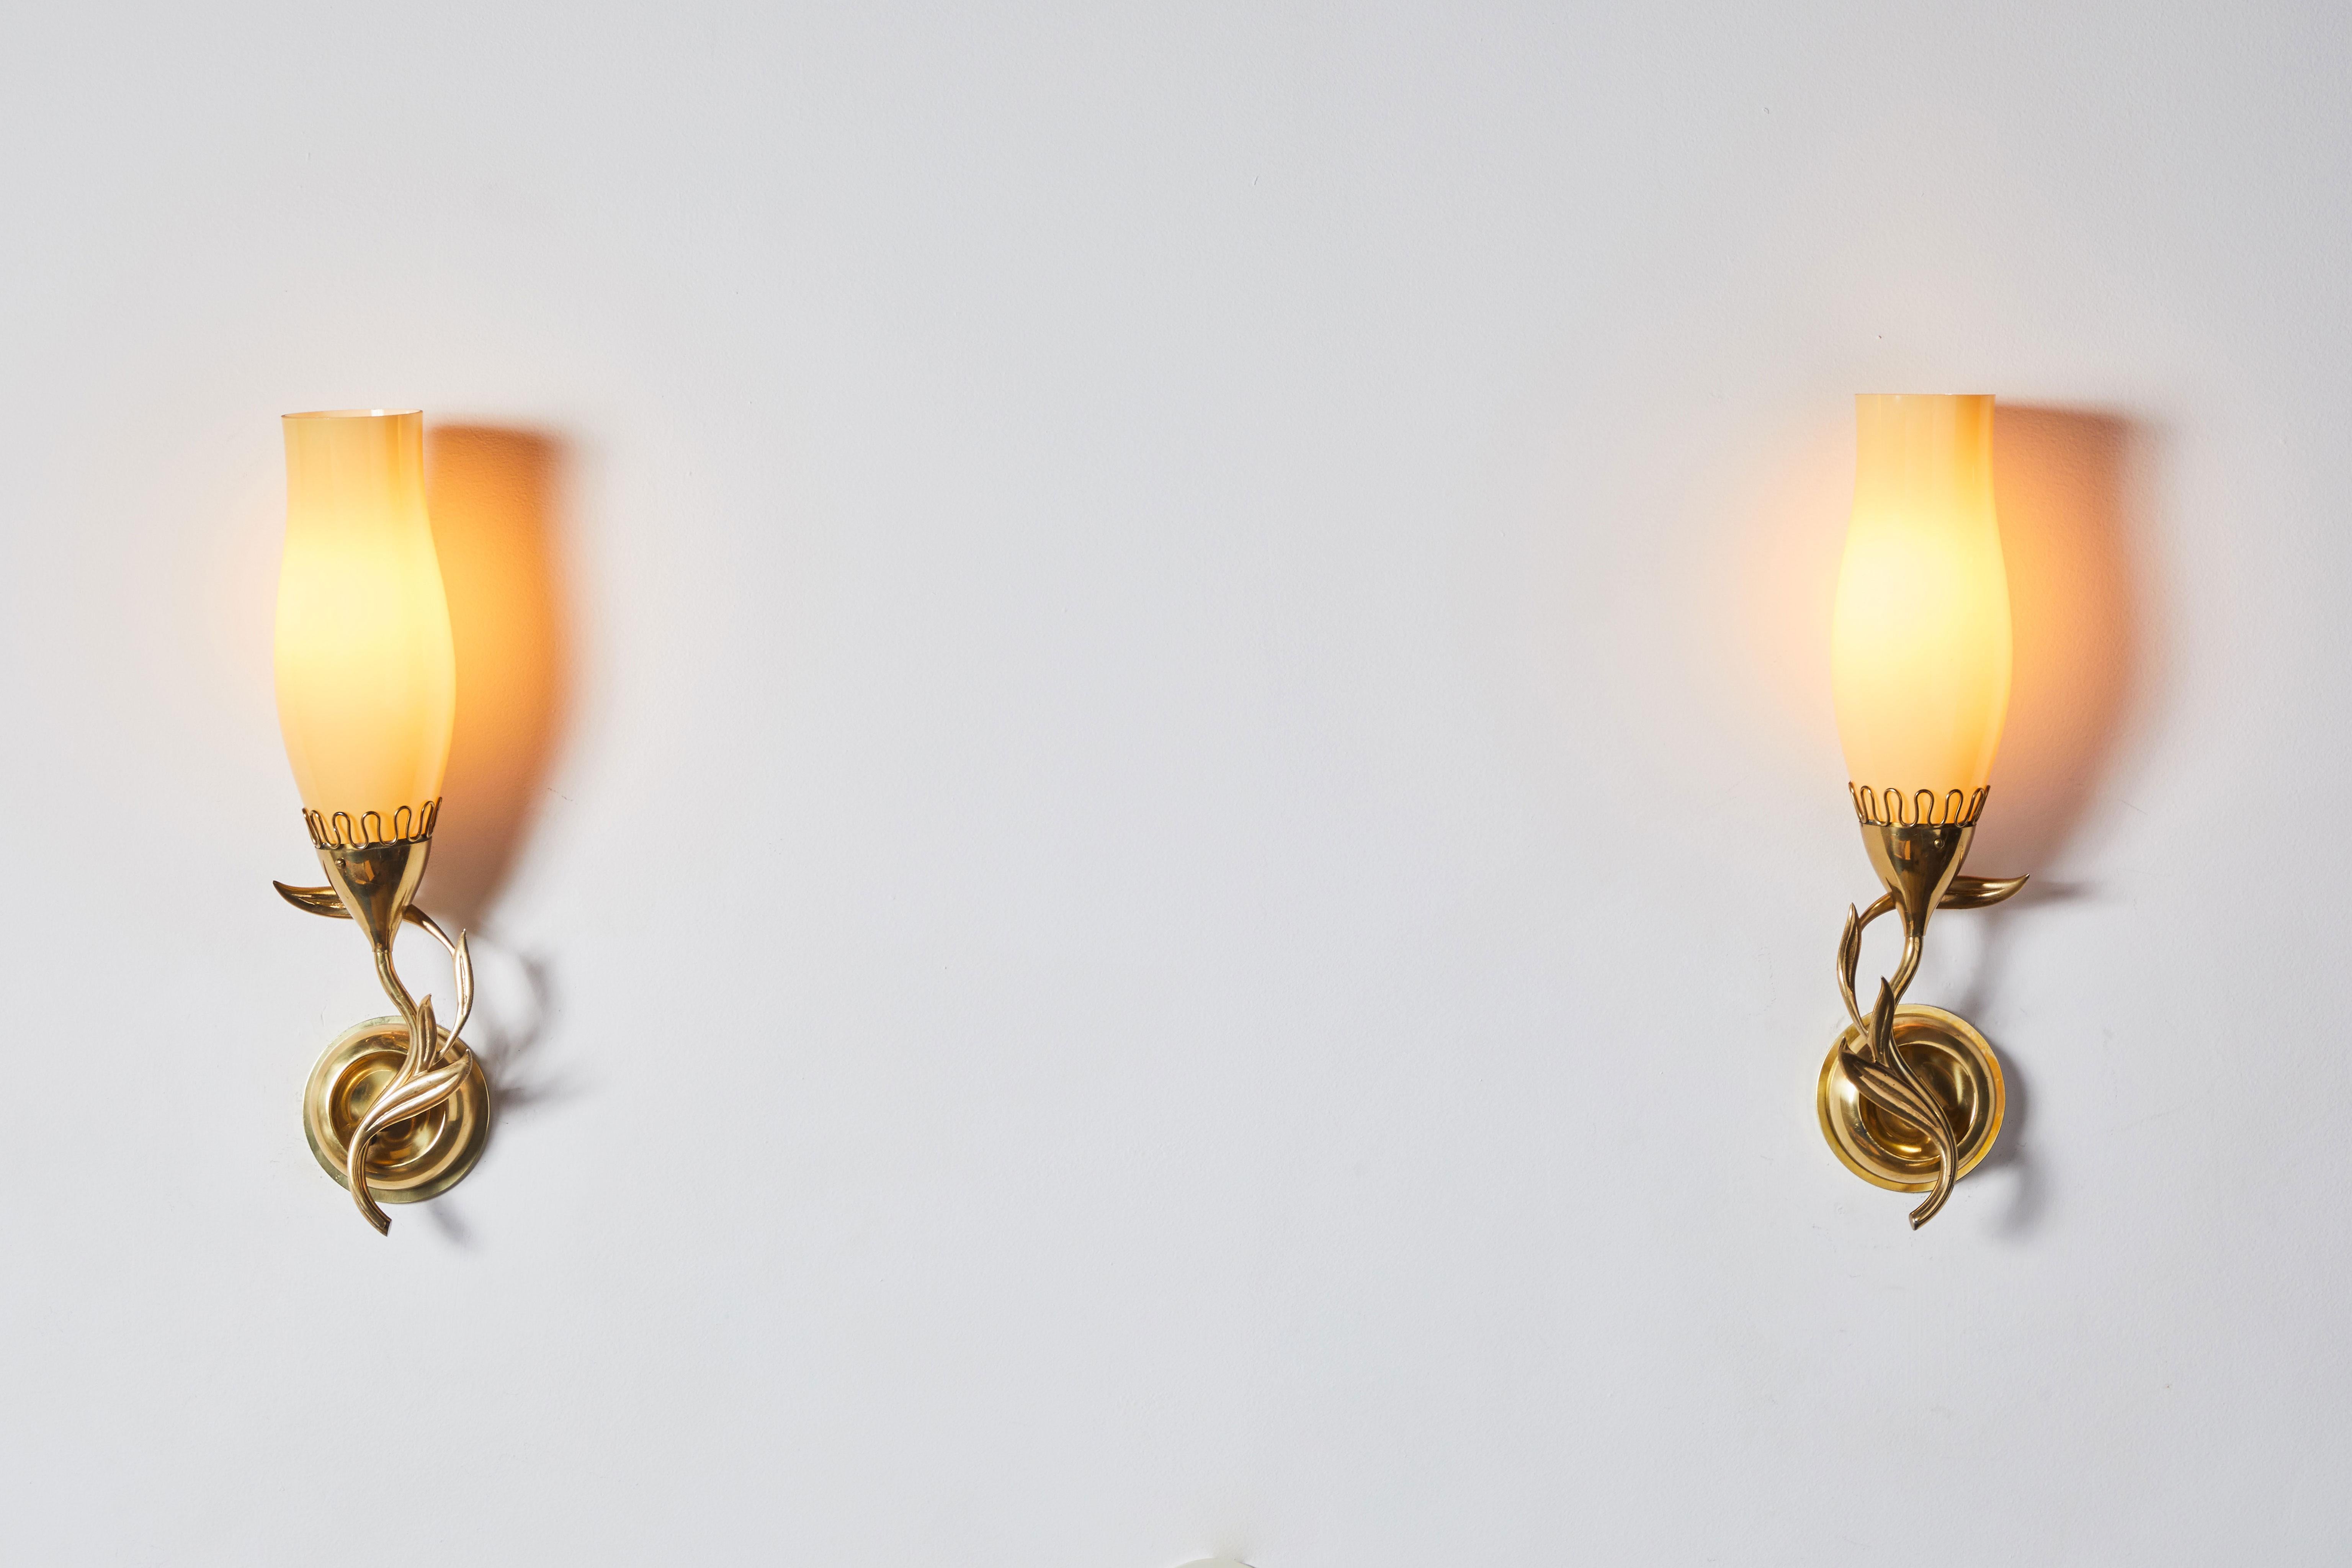 Pair of sconces by Paavo Tynell for Idman Oy. Designed and manufactured in Finland, circa 1940's. Opaque glass diffusers, brass hardware. Custom brass backplates. Rewired for US junction boxes. Each sconce takes one E27 75w maximum bulb.
 